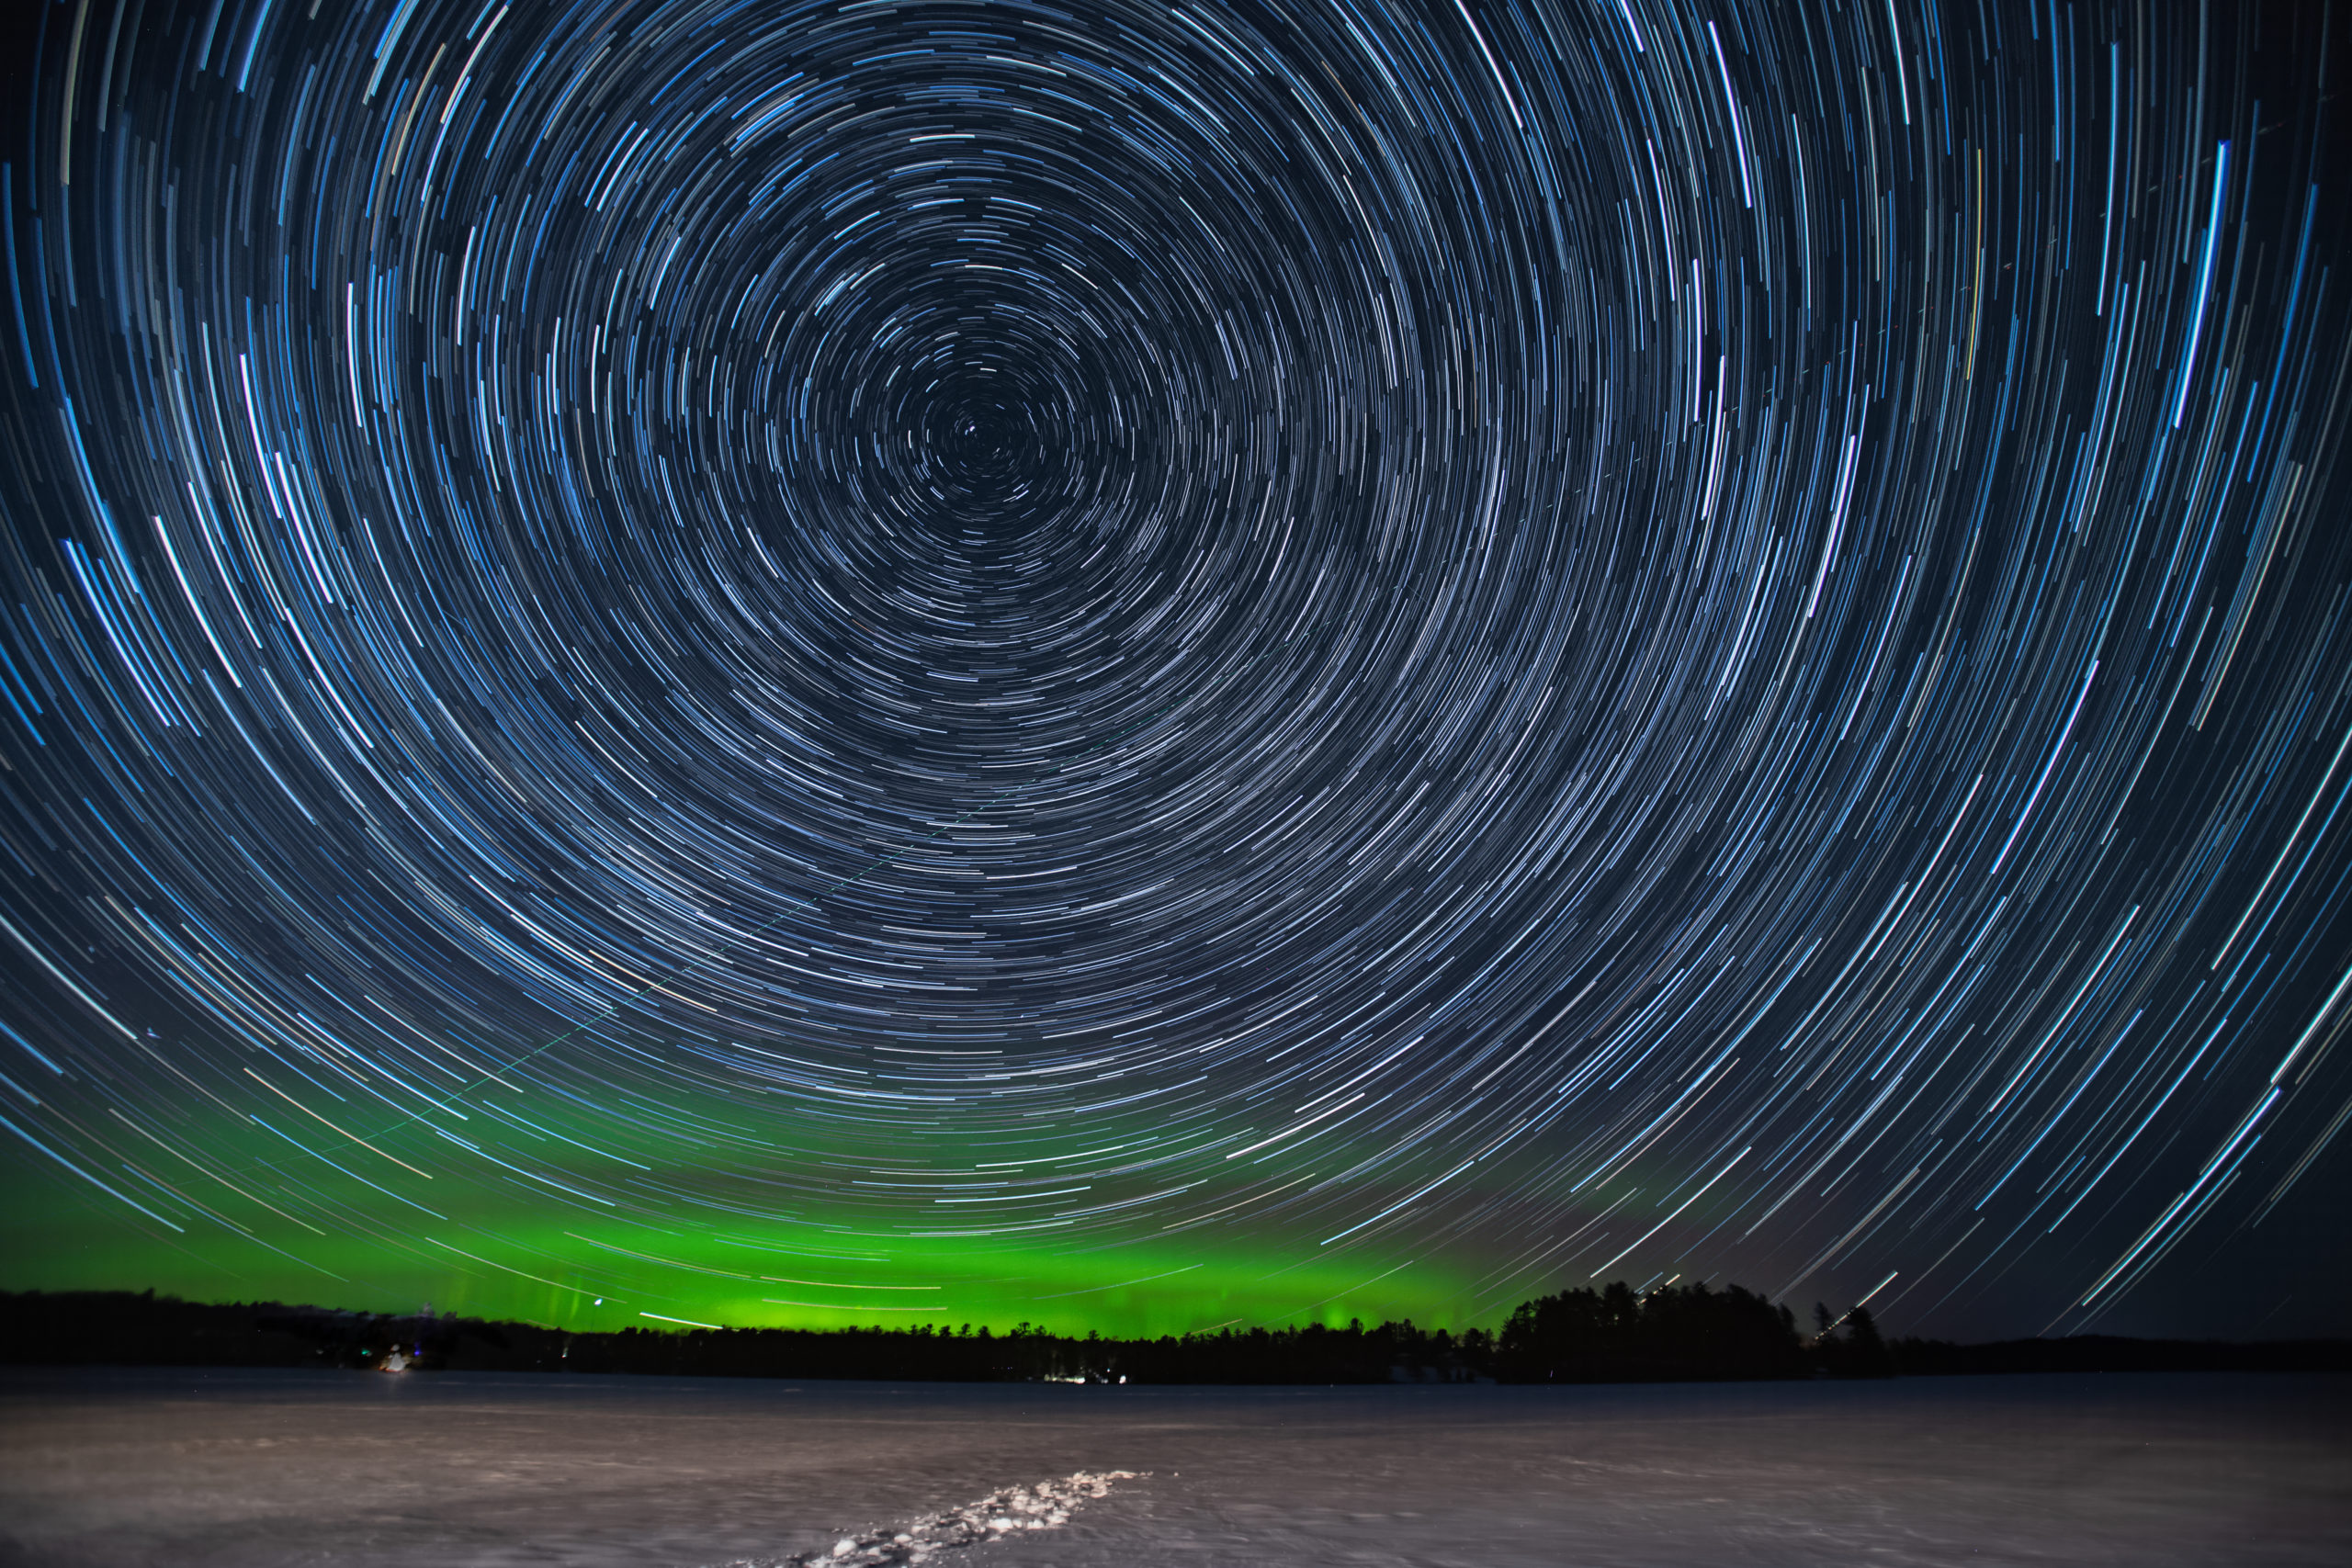 Plum Lake star trails and northern lights